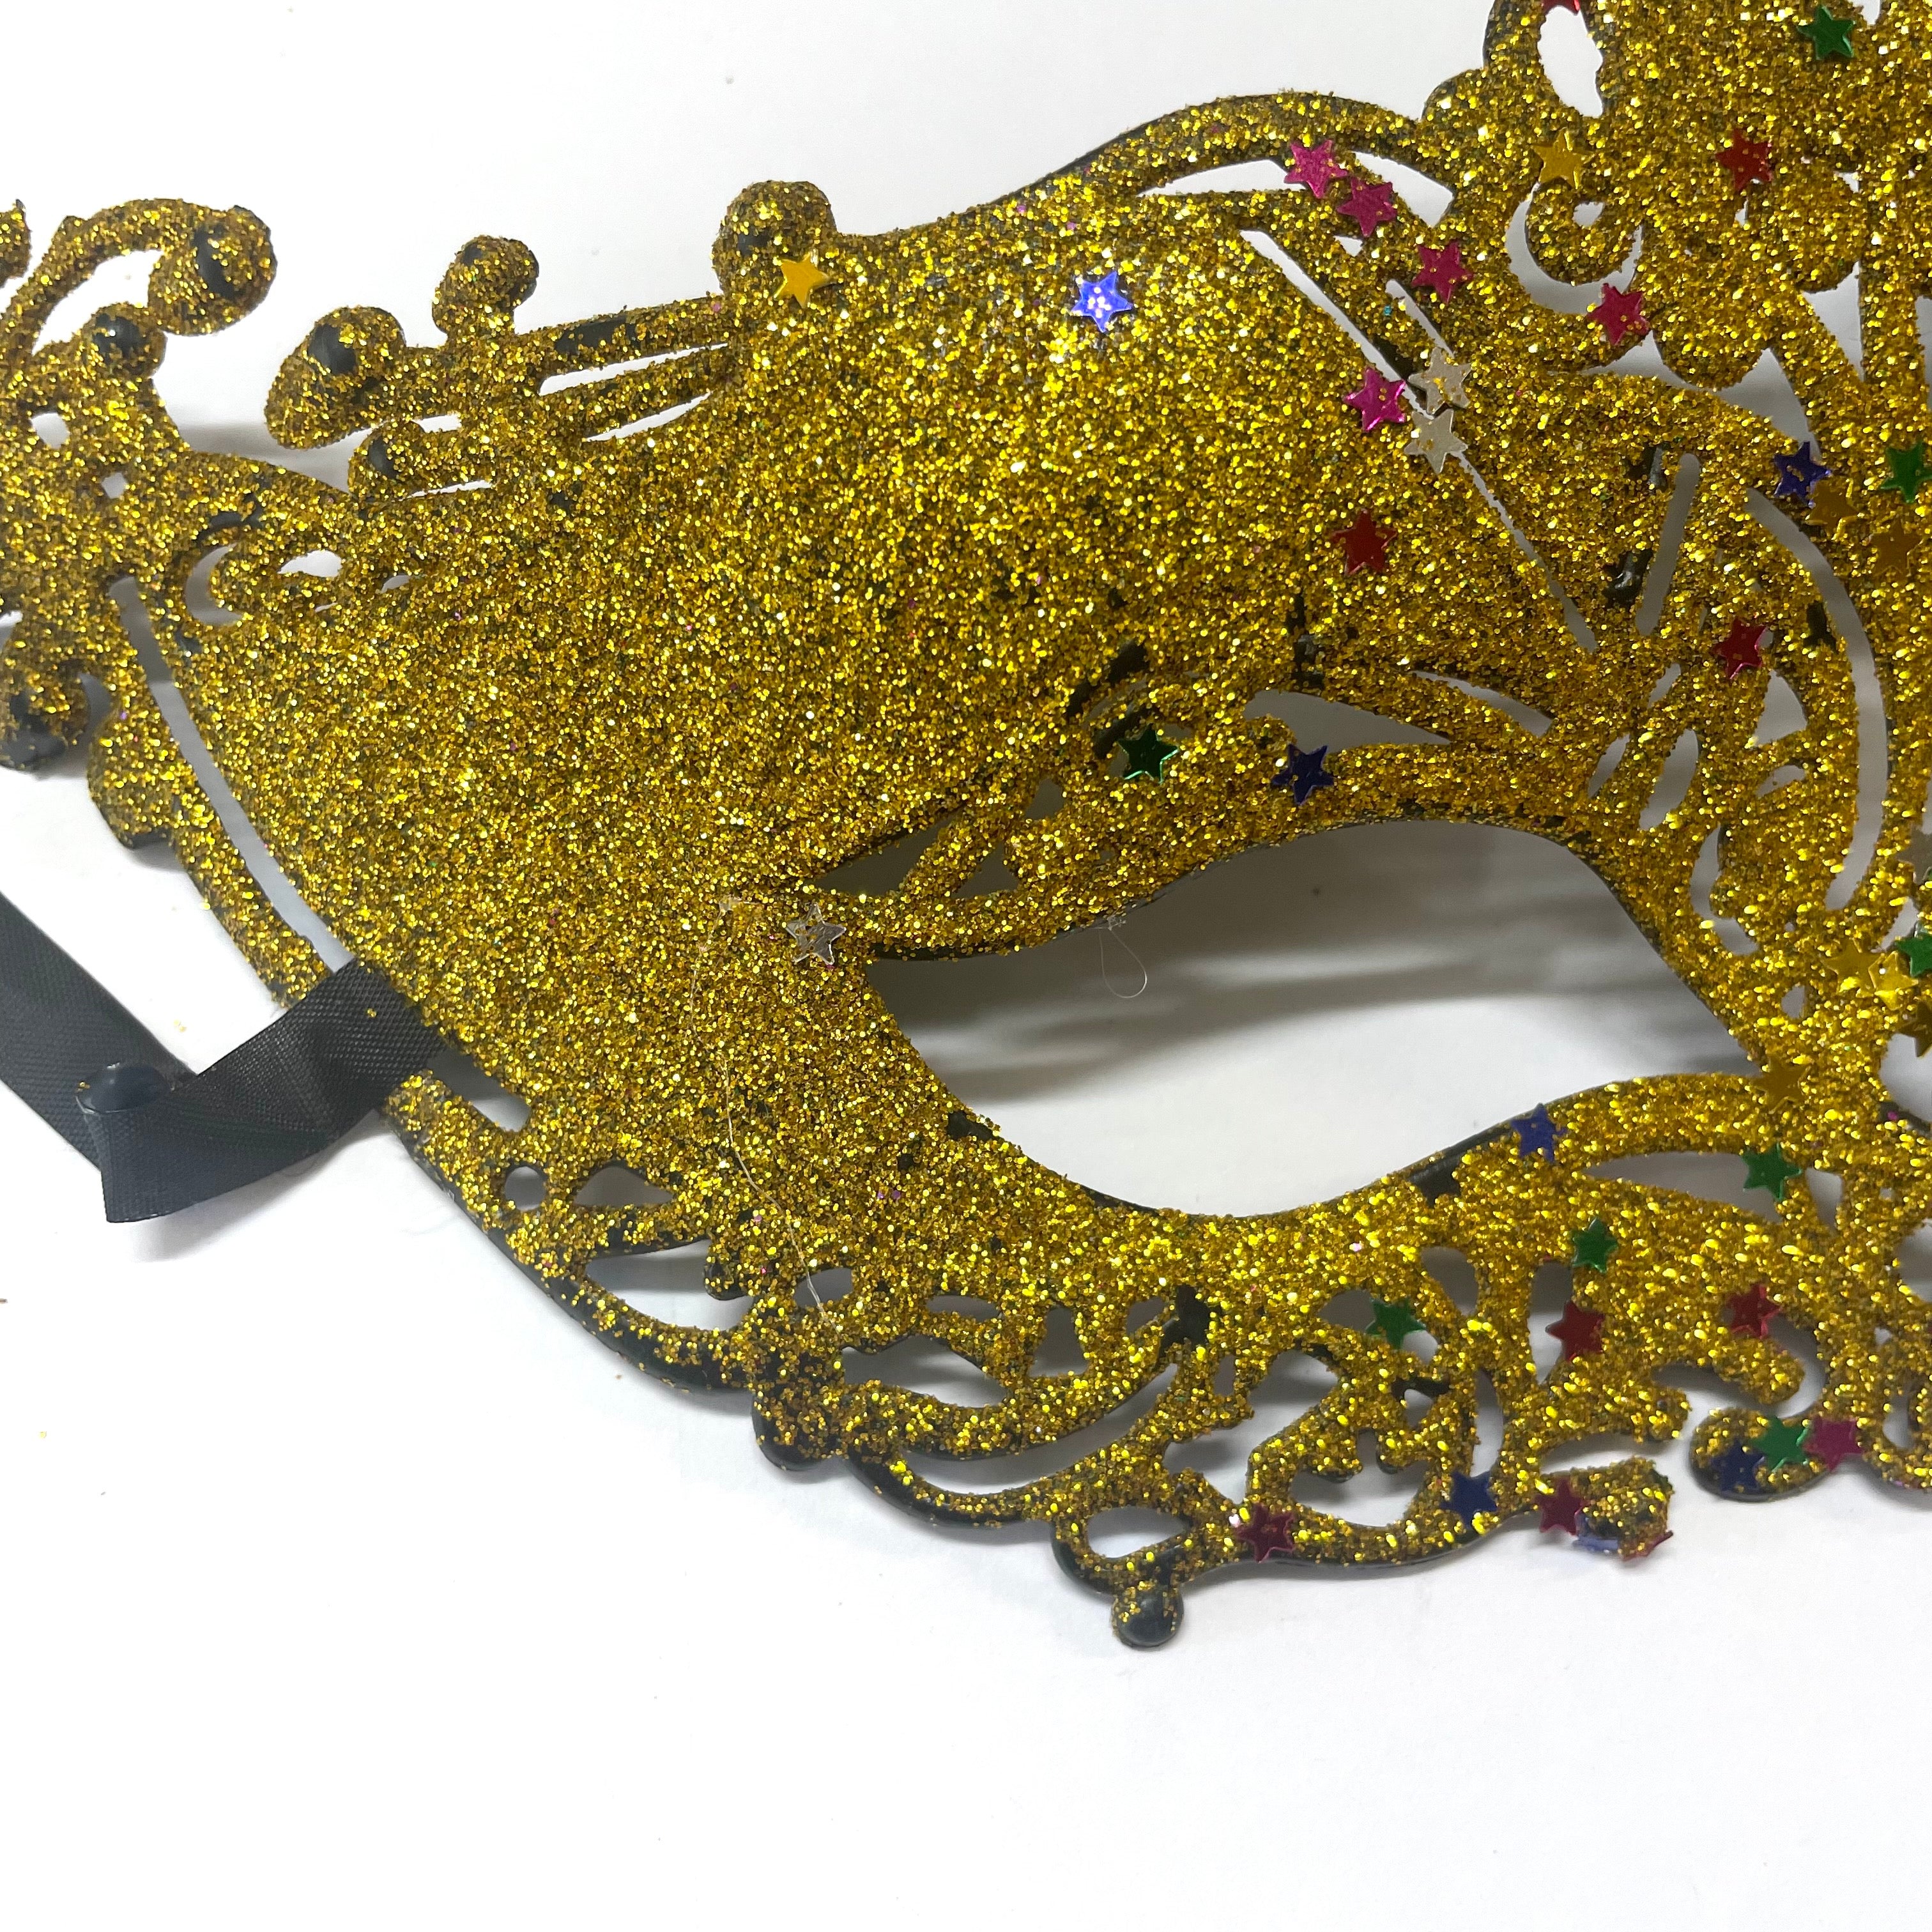 Women Lace Sexy Elegant Masquerade Ball Party Mask - Gold ((Style 5))